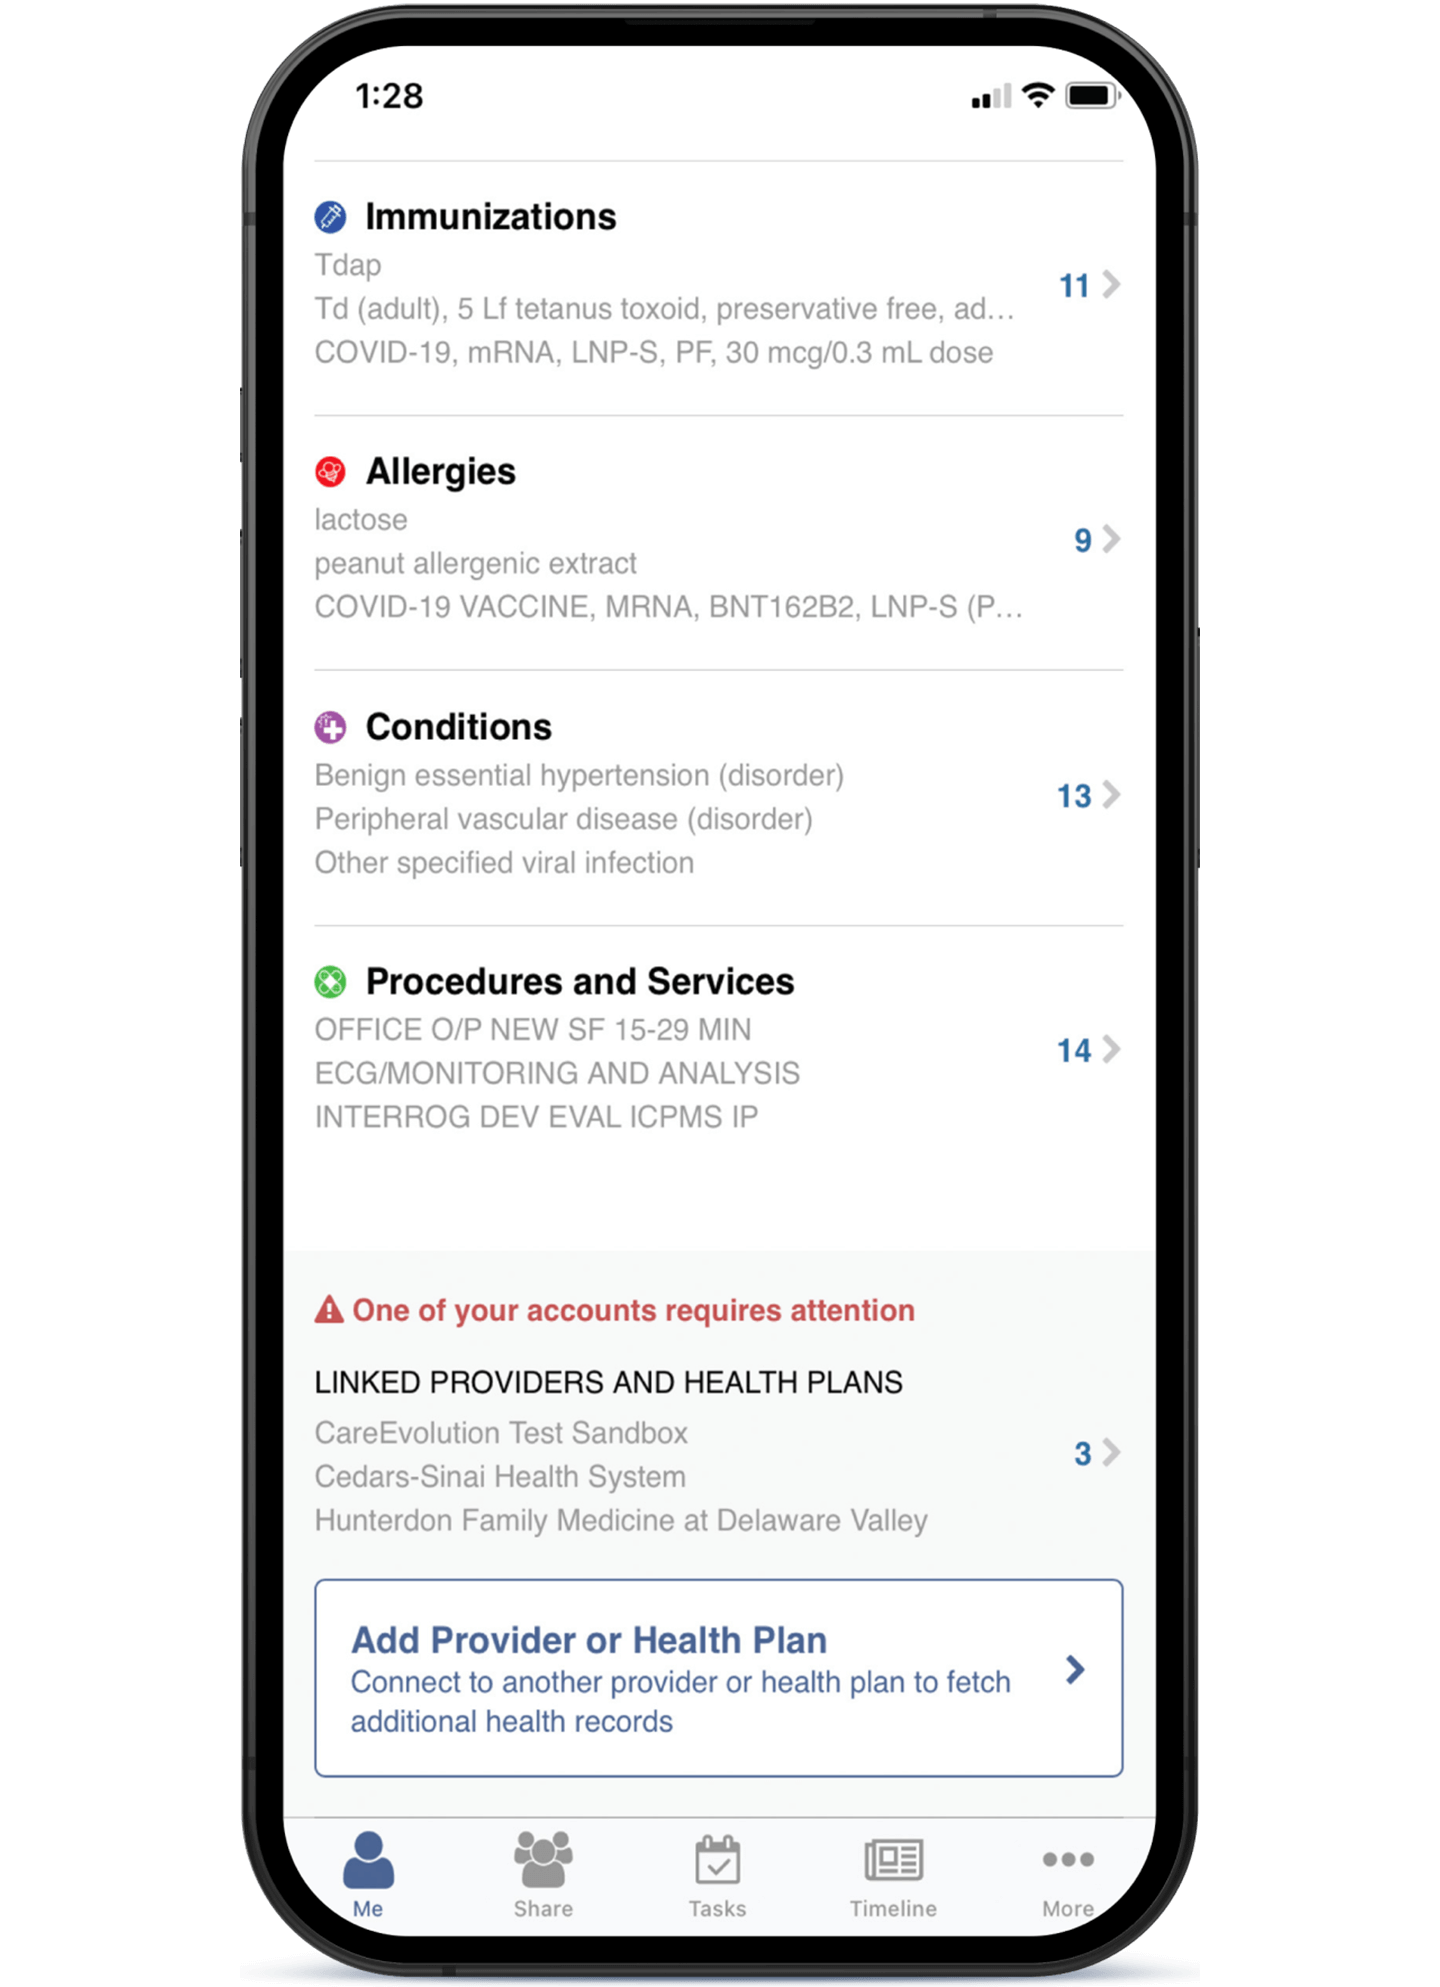 App screen for myFHR showing four sections: Immunizations, allergies, conditions, procedures and services. It also shows an alert that requires attention. And a way to add provider or health plan.